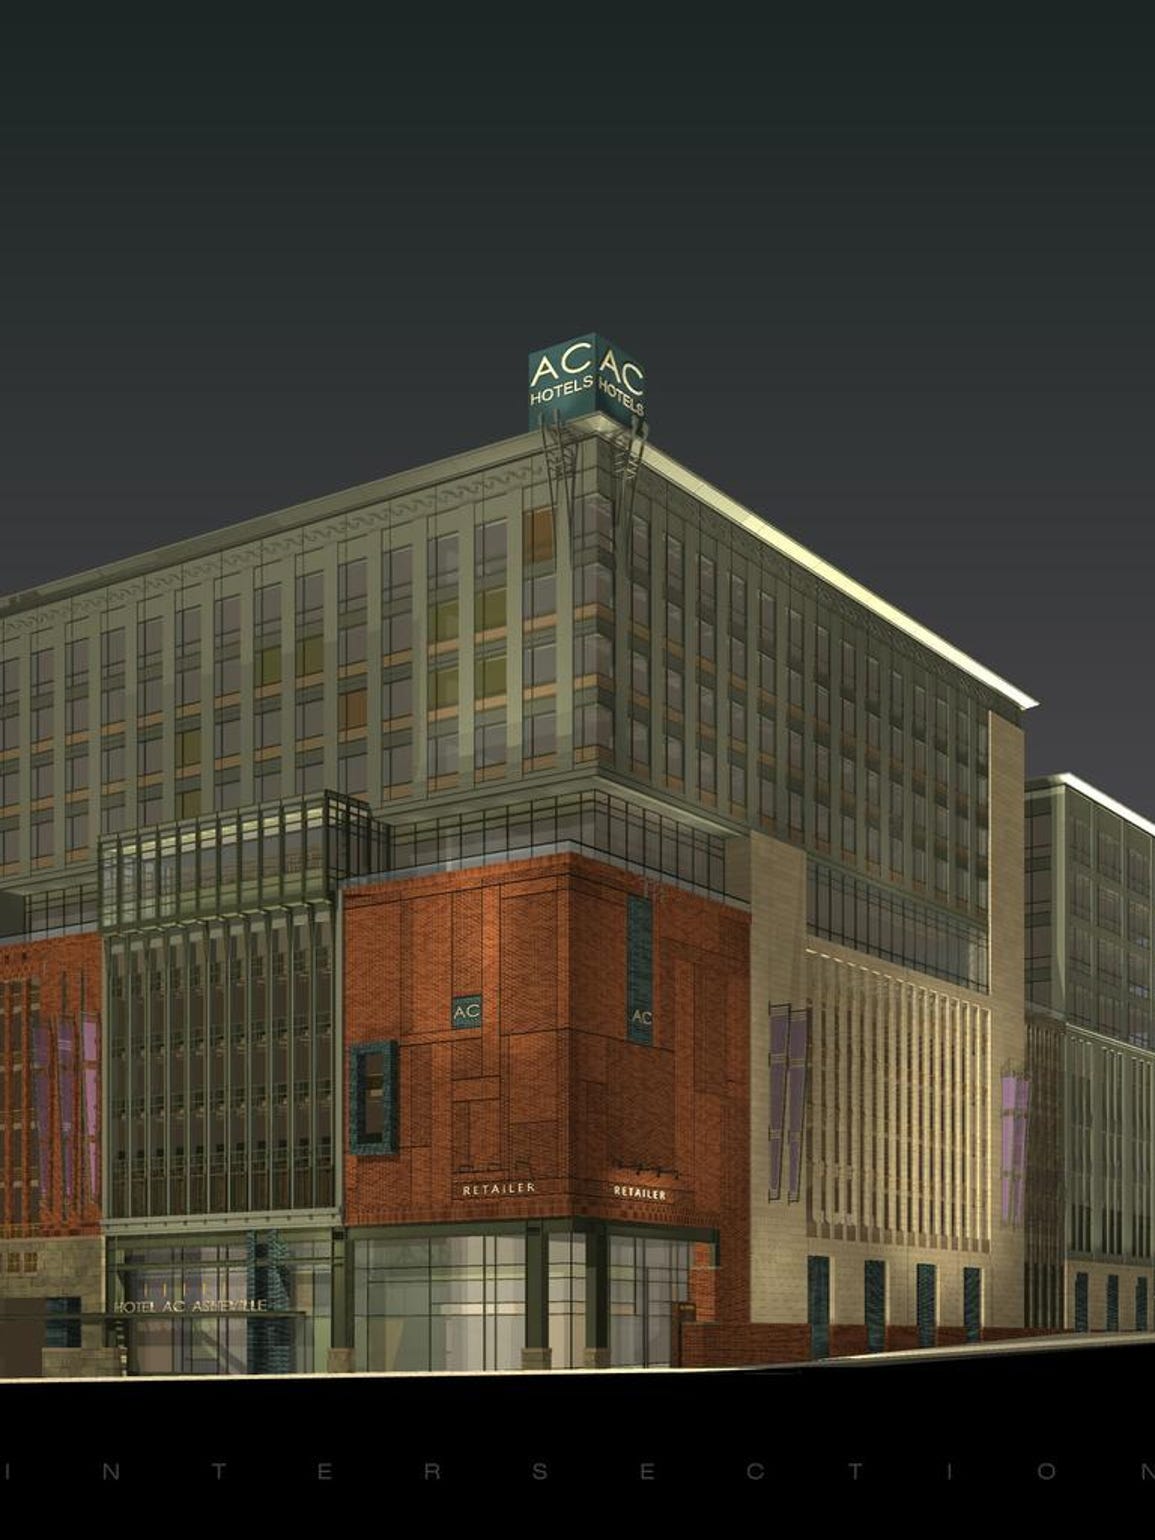 This artist's rendering shows the AC Hotel proposed